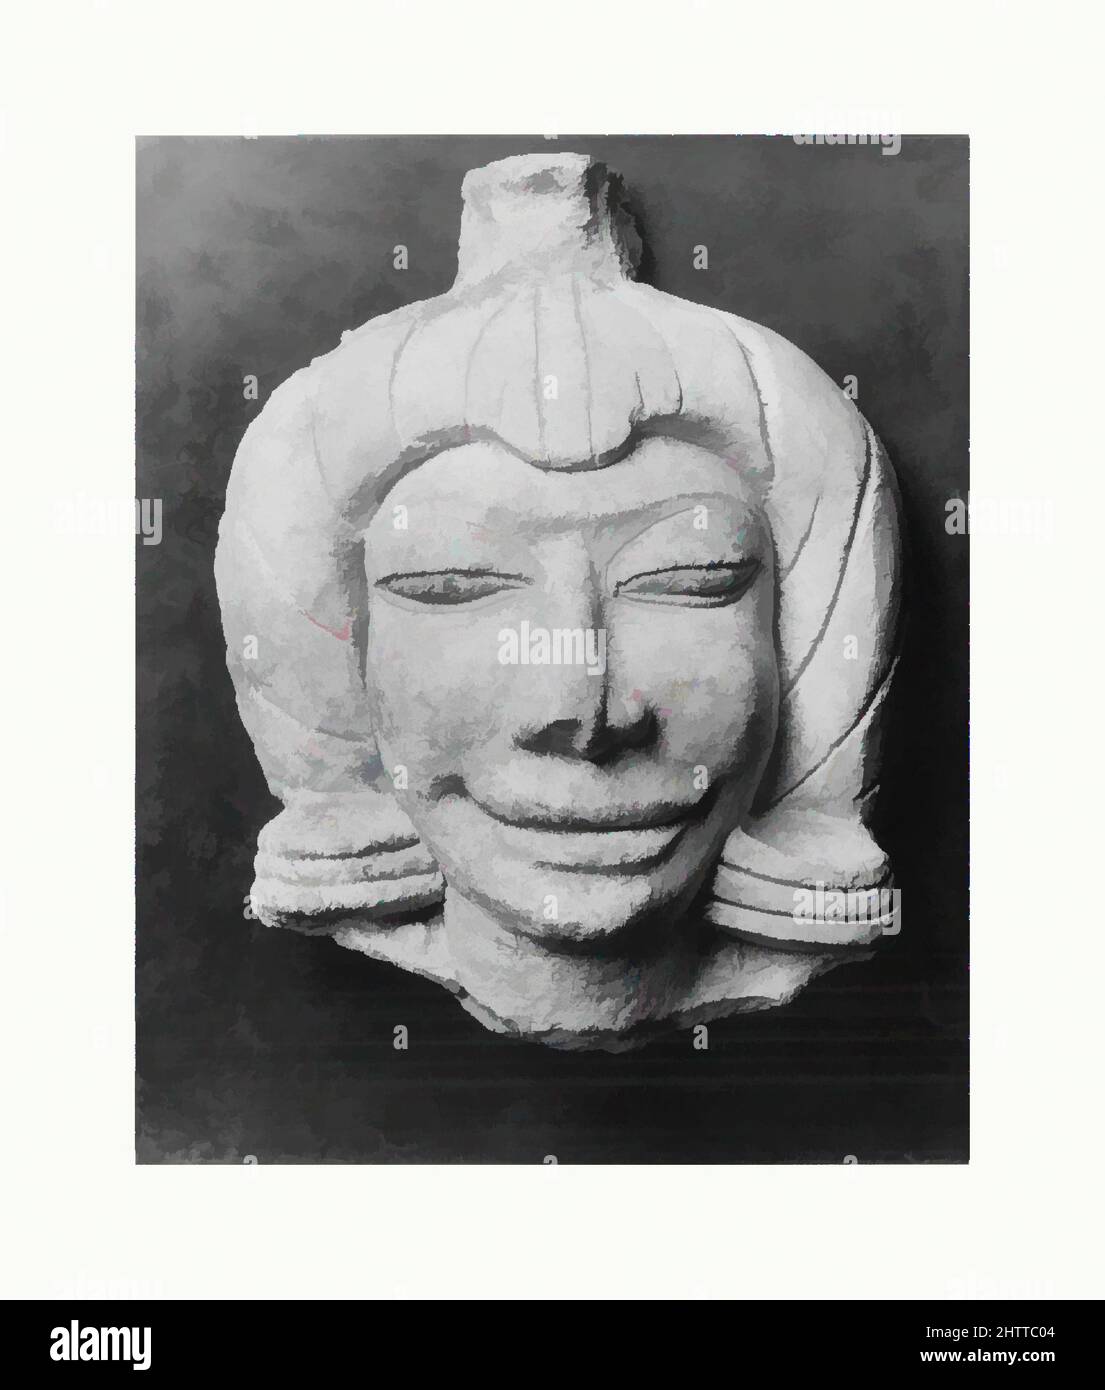 Art inspired by Head of a Male Figure, Mon-Dvaravati period, 8th–9th century, Thailand (Ratchaburi Province, Ku Bua), Stucco with color, H. 6 7/8 in. (17.5 cm), Sculpture, In Thailand, stupas and temples were often embellished with terracotta and stucco sculptures. In some instances, Classic works modernized by Artotop with a splash of modernity. Shapes, color and value, eye-catching visual impact on art. Emotions through freedom of artworks in a contemporary way. A timeless message pursuing a wildly creative new direction. Artists turning to the digital medium and creating the Artotop NFT Stock Photo